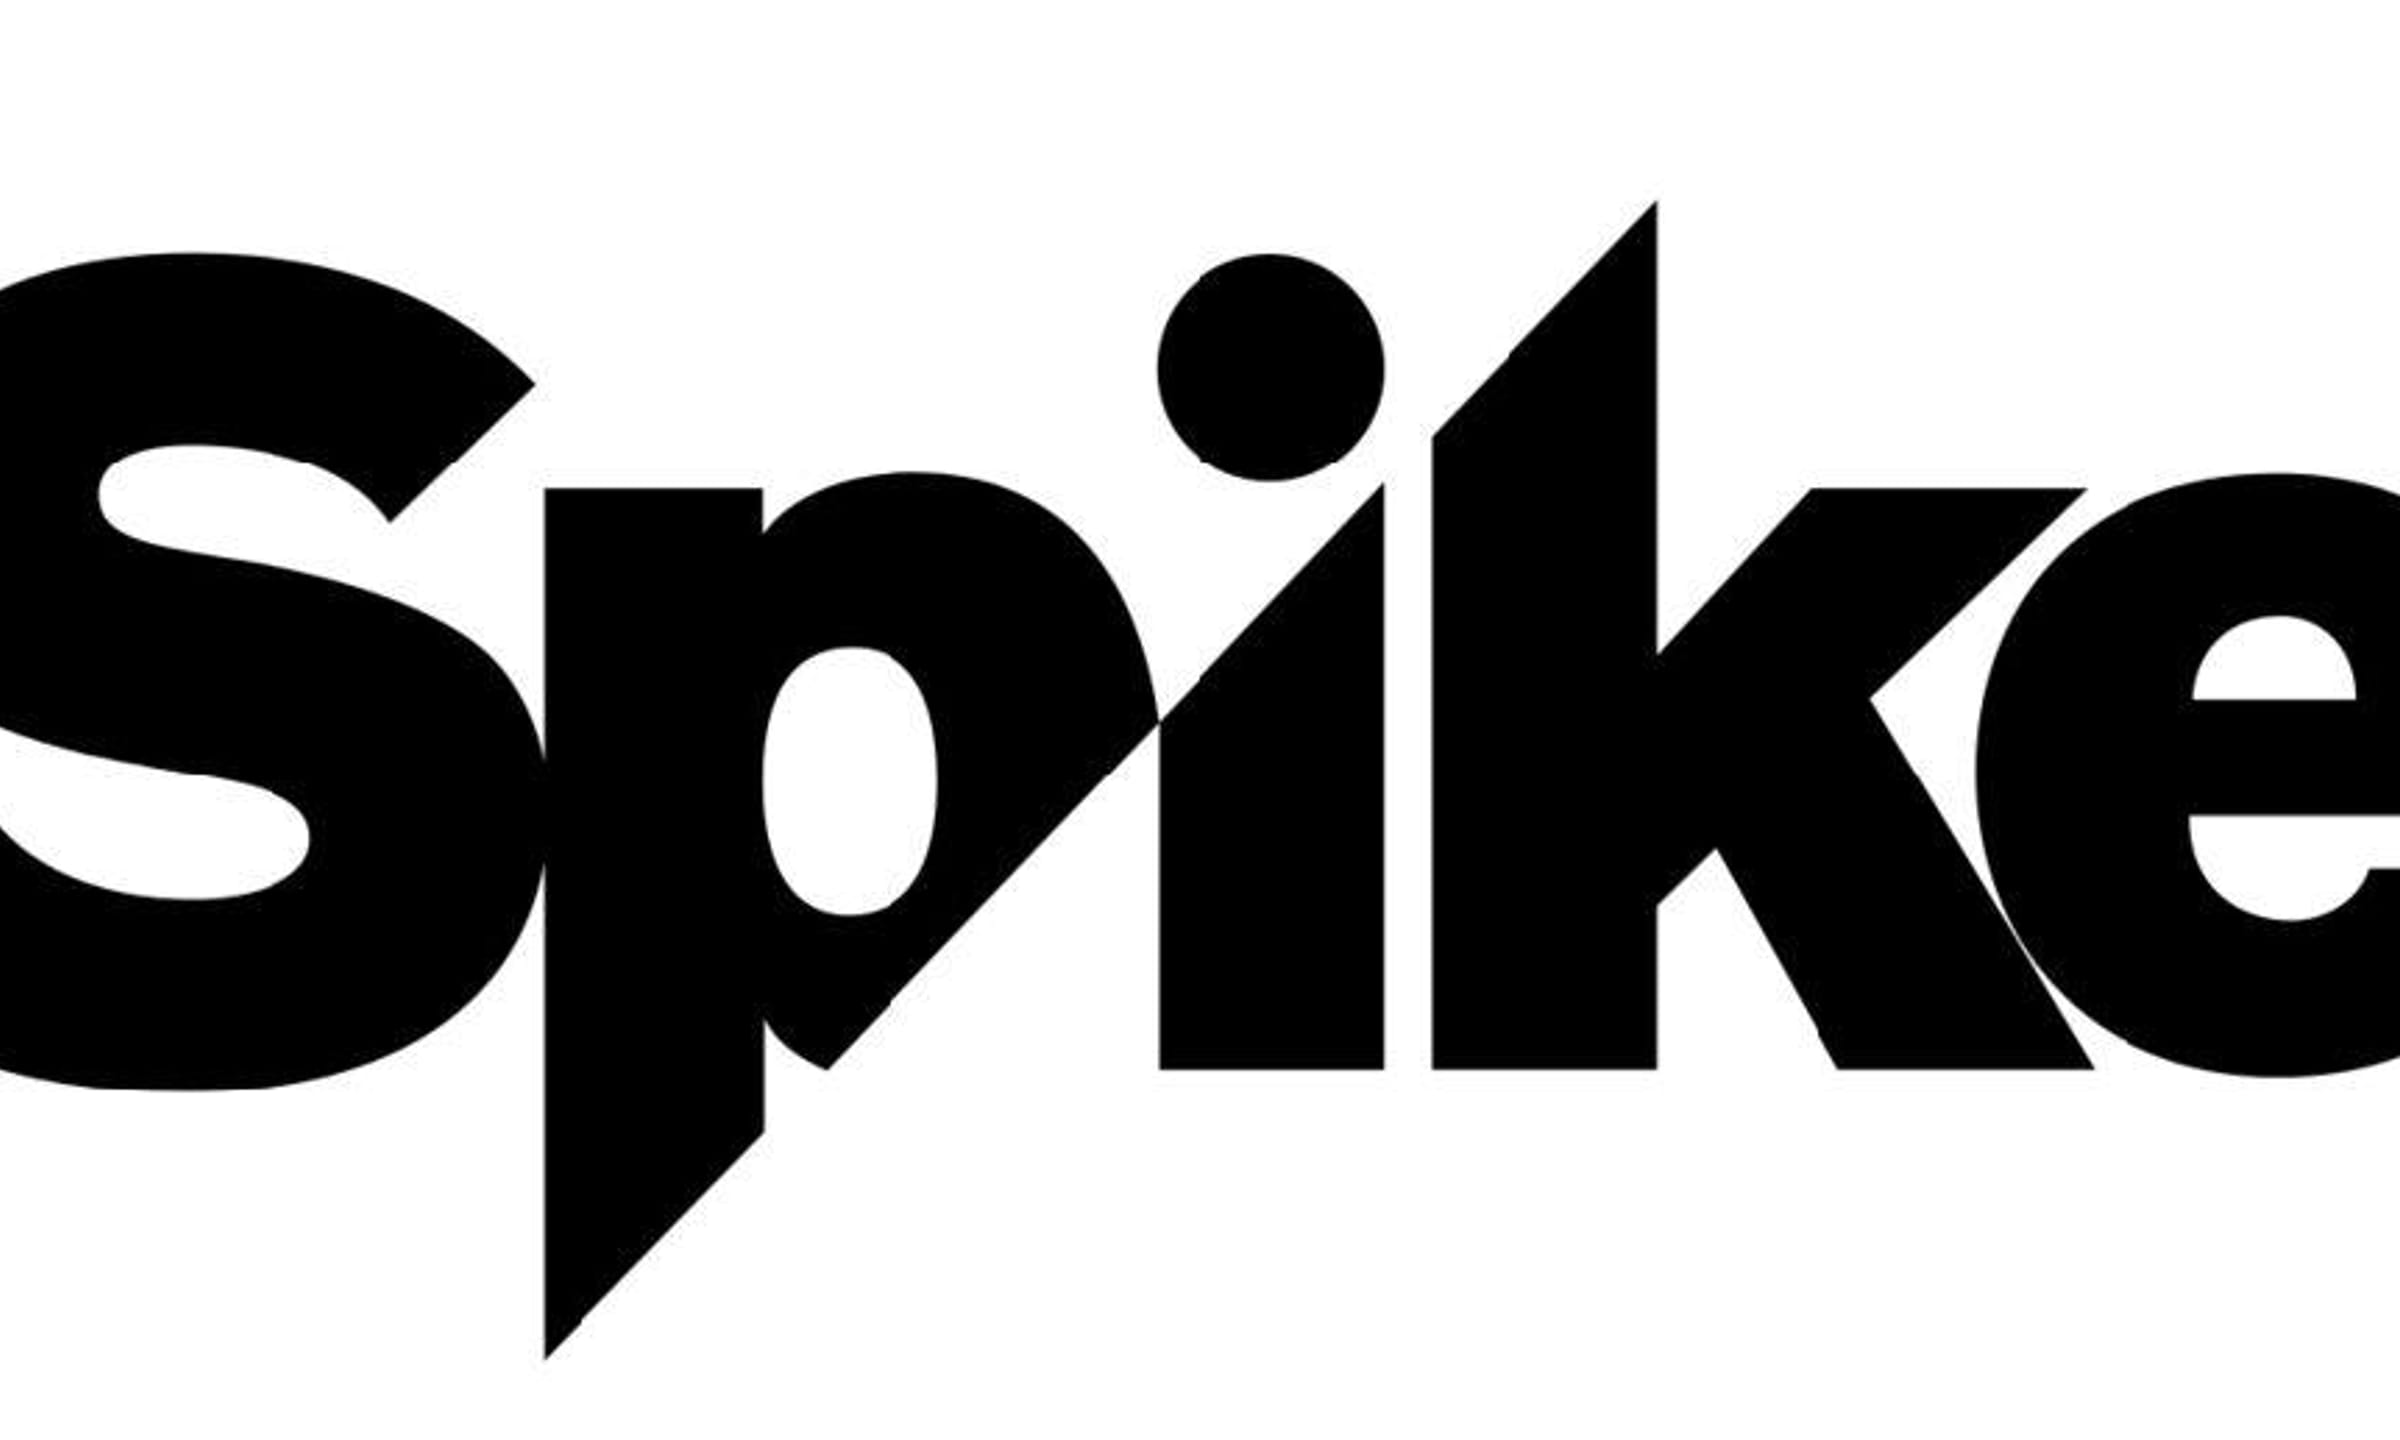 The Rise And Fall Of SpikeTV